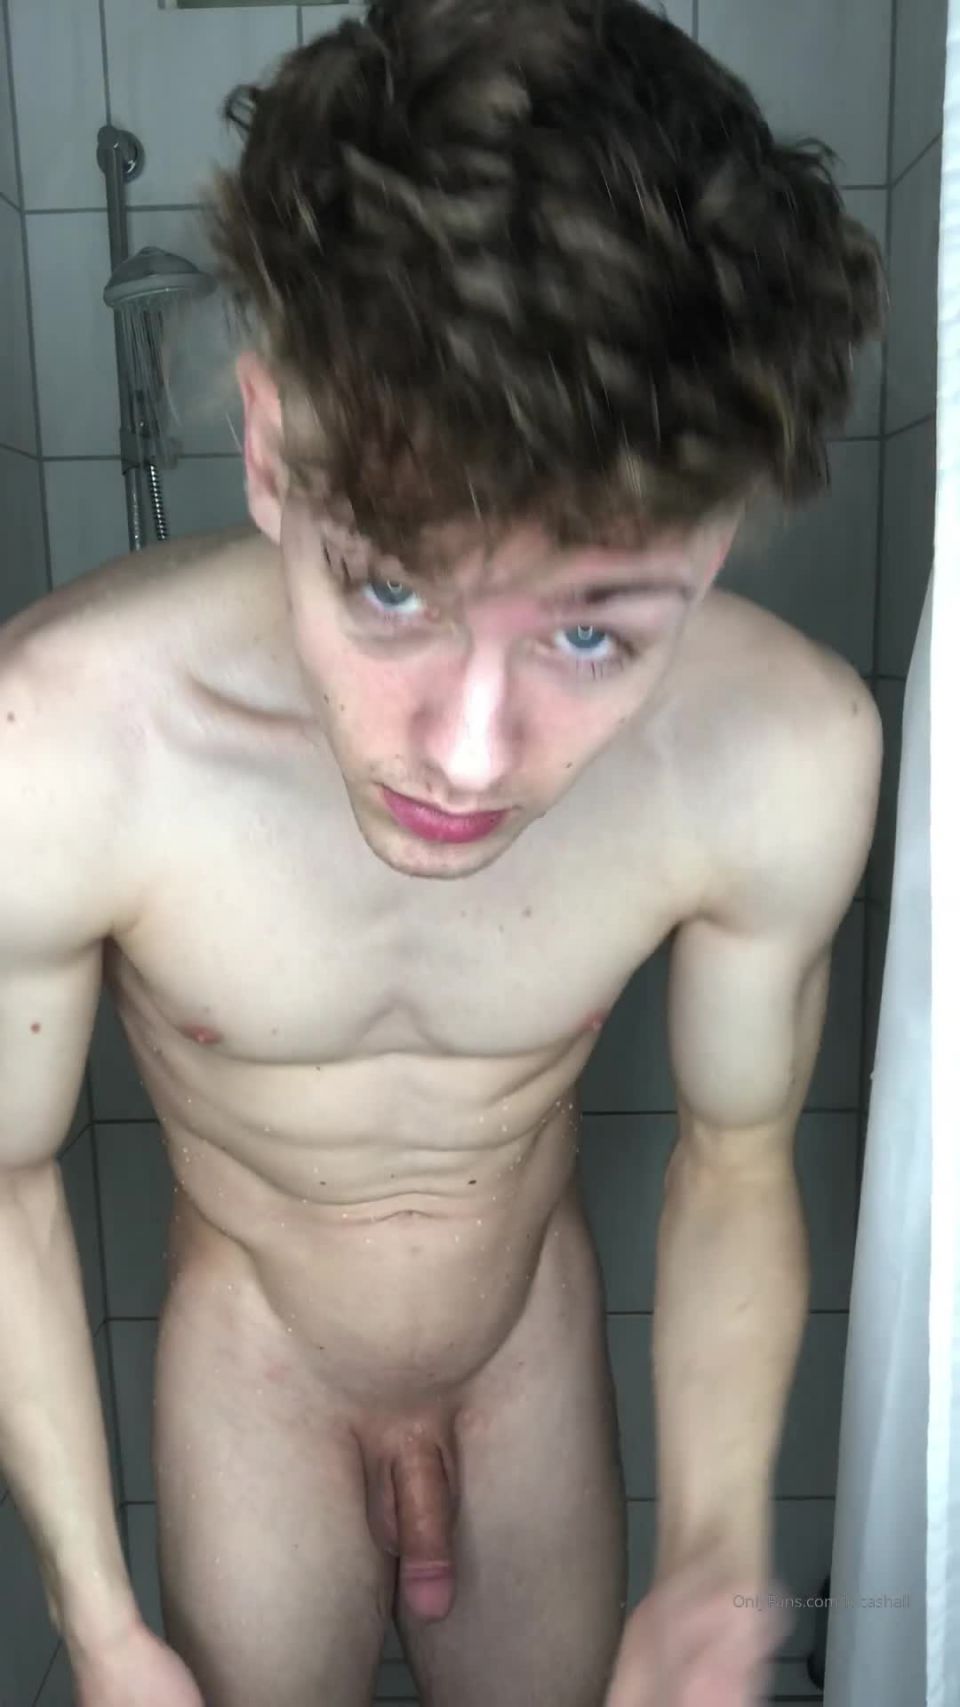 Lucas Hall () Lucashall - standing in the shower fingering my freshly shaved asshole and moaning for you 16-03-2020